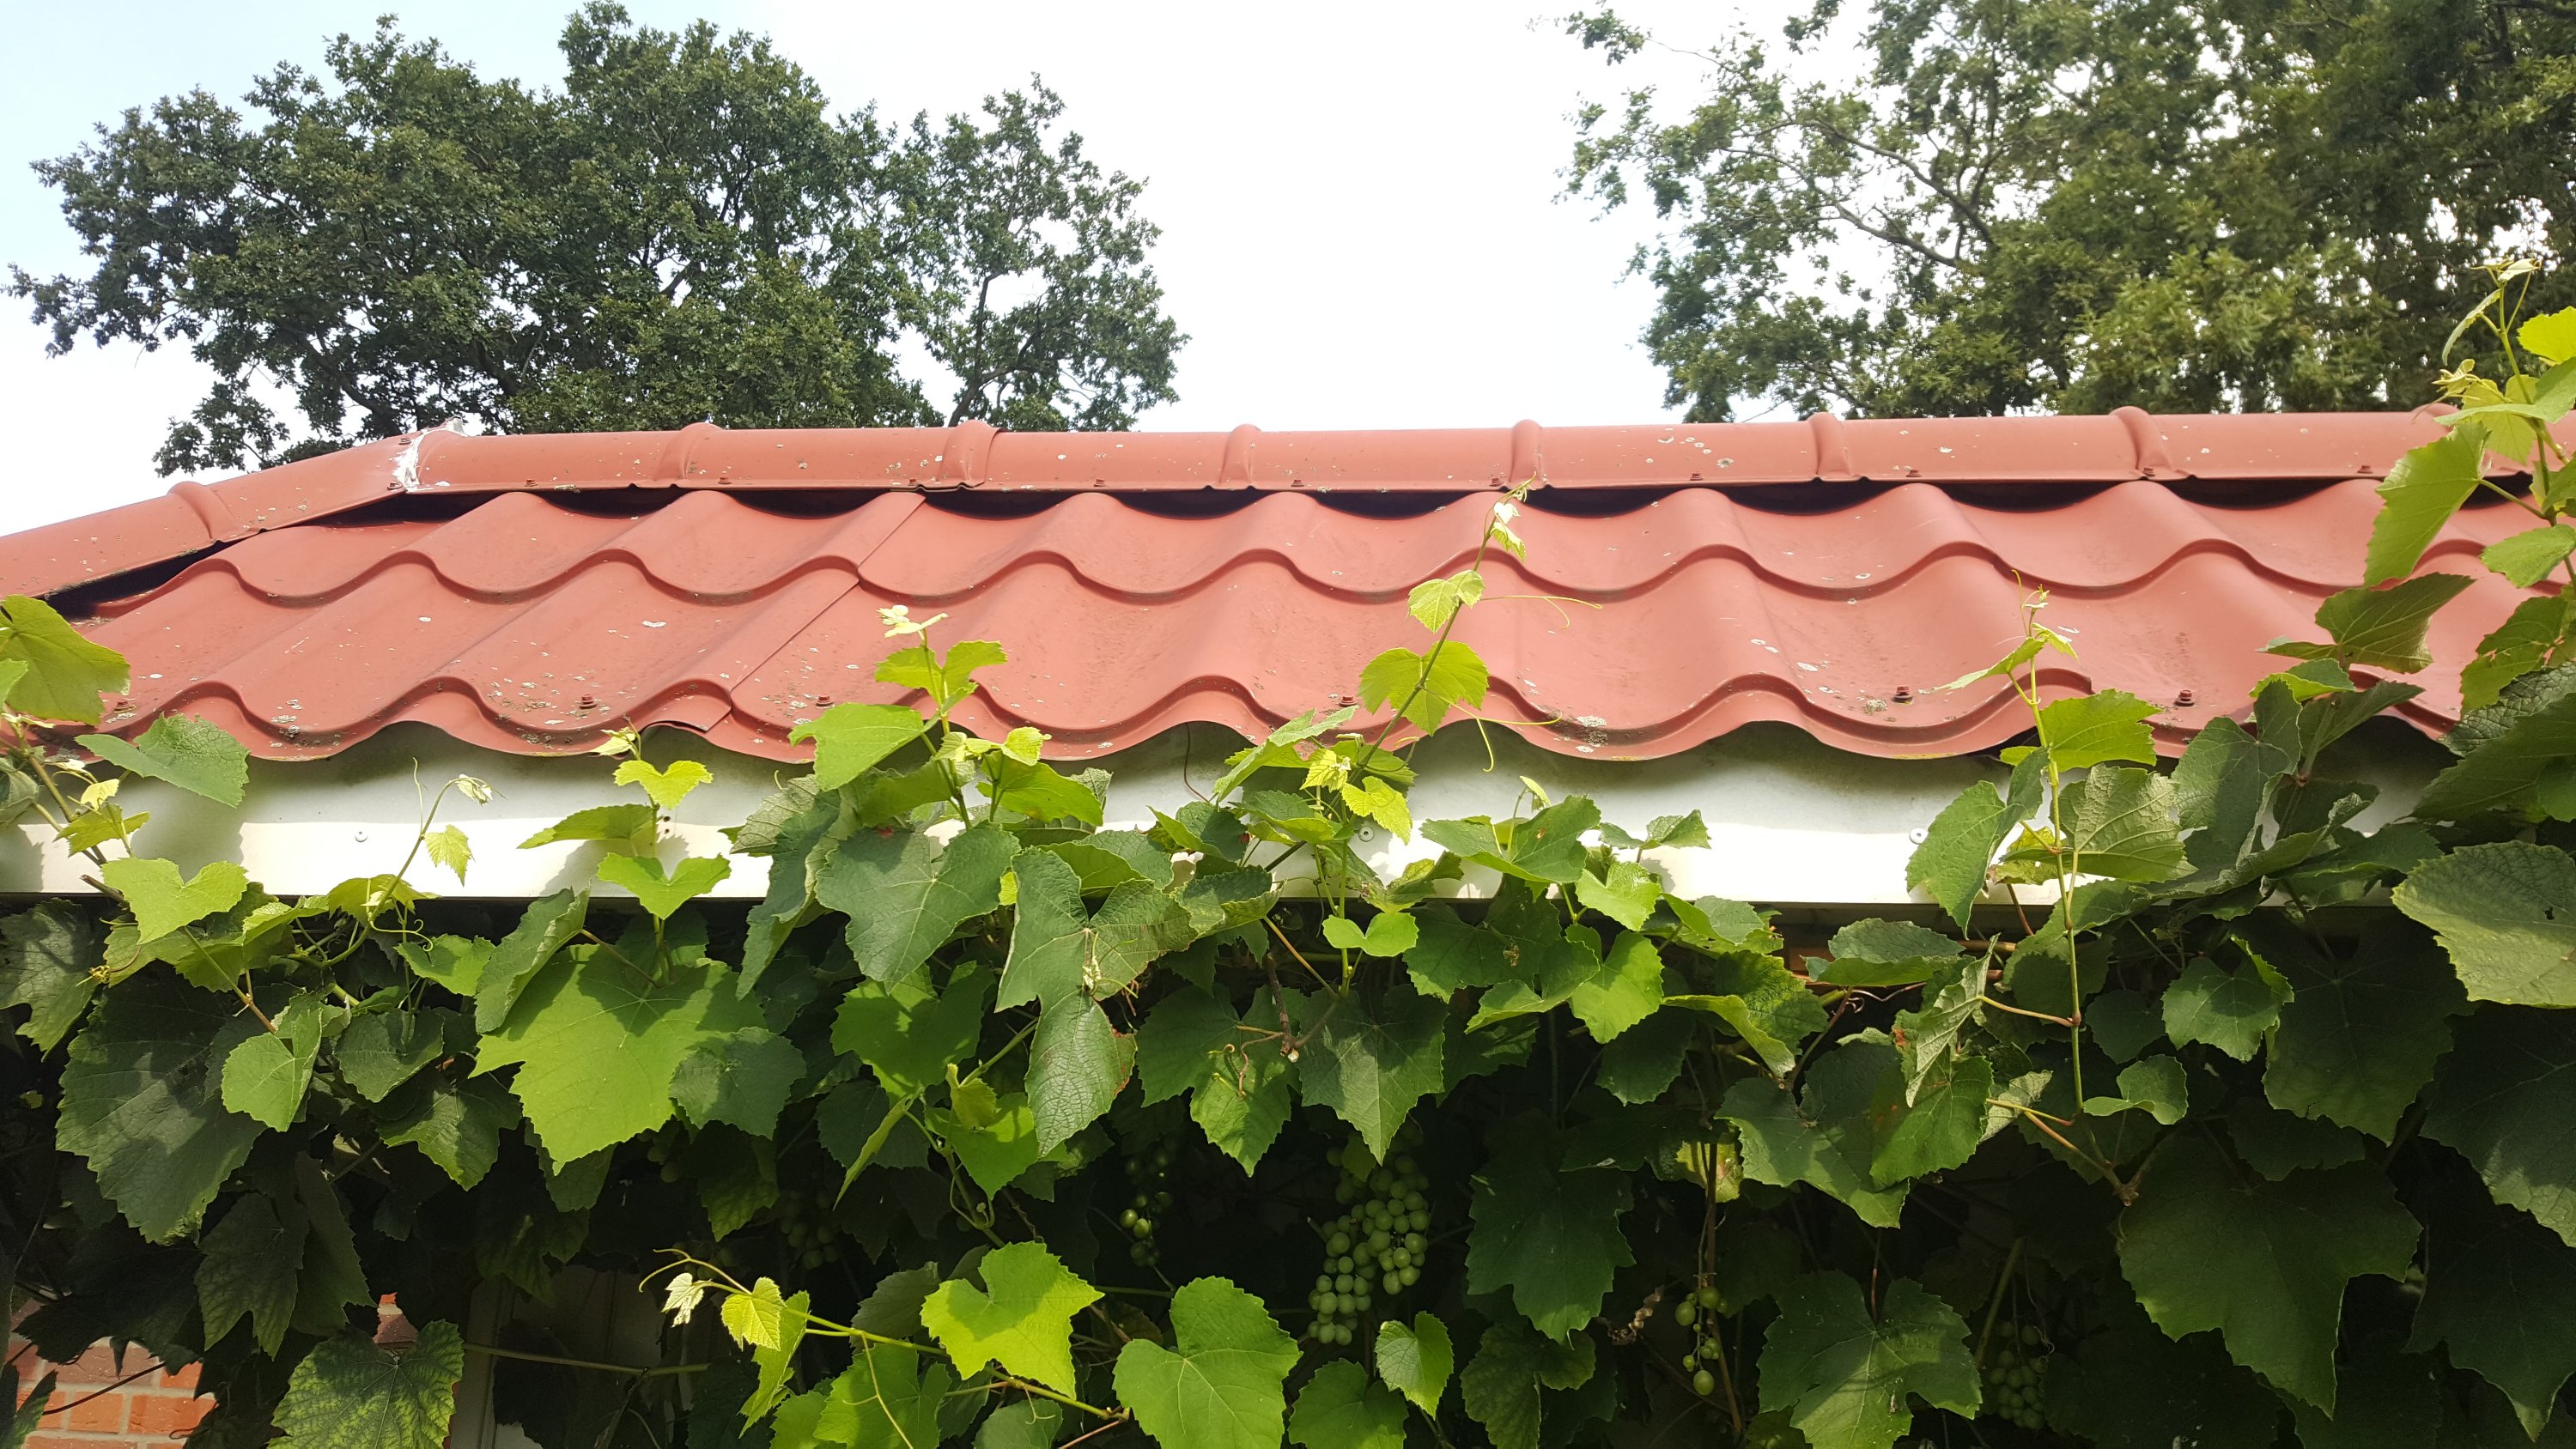 Pitched, clay-style roof made of metal